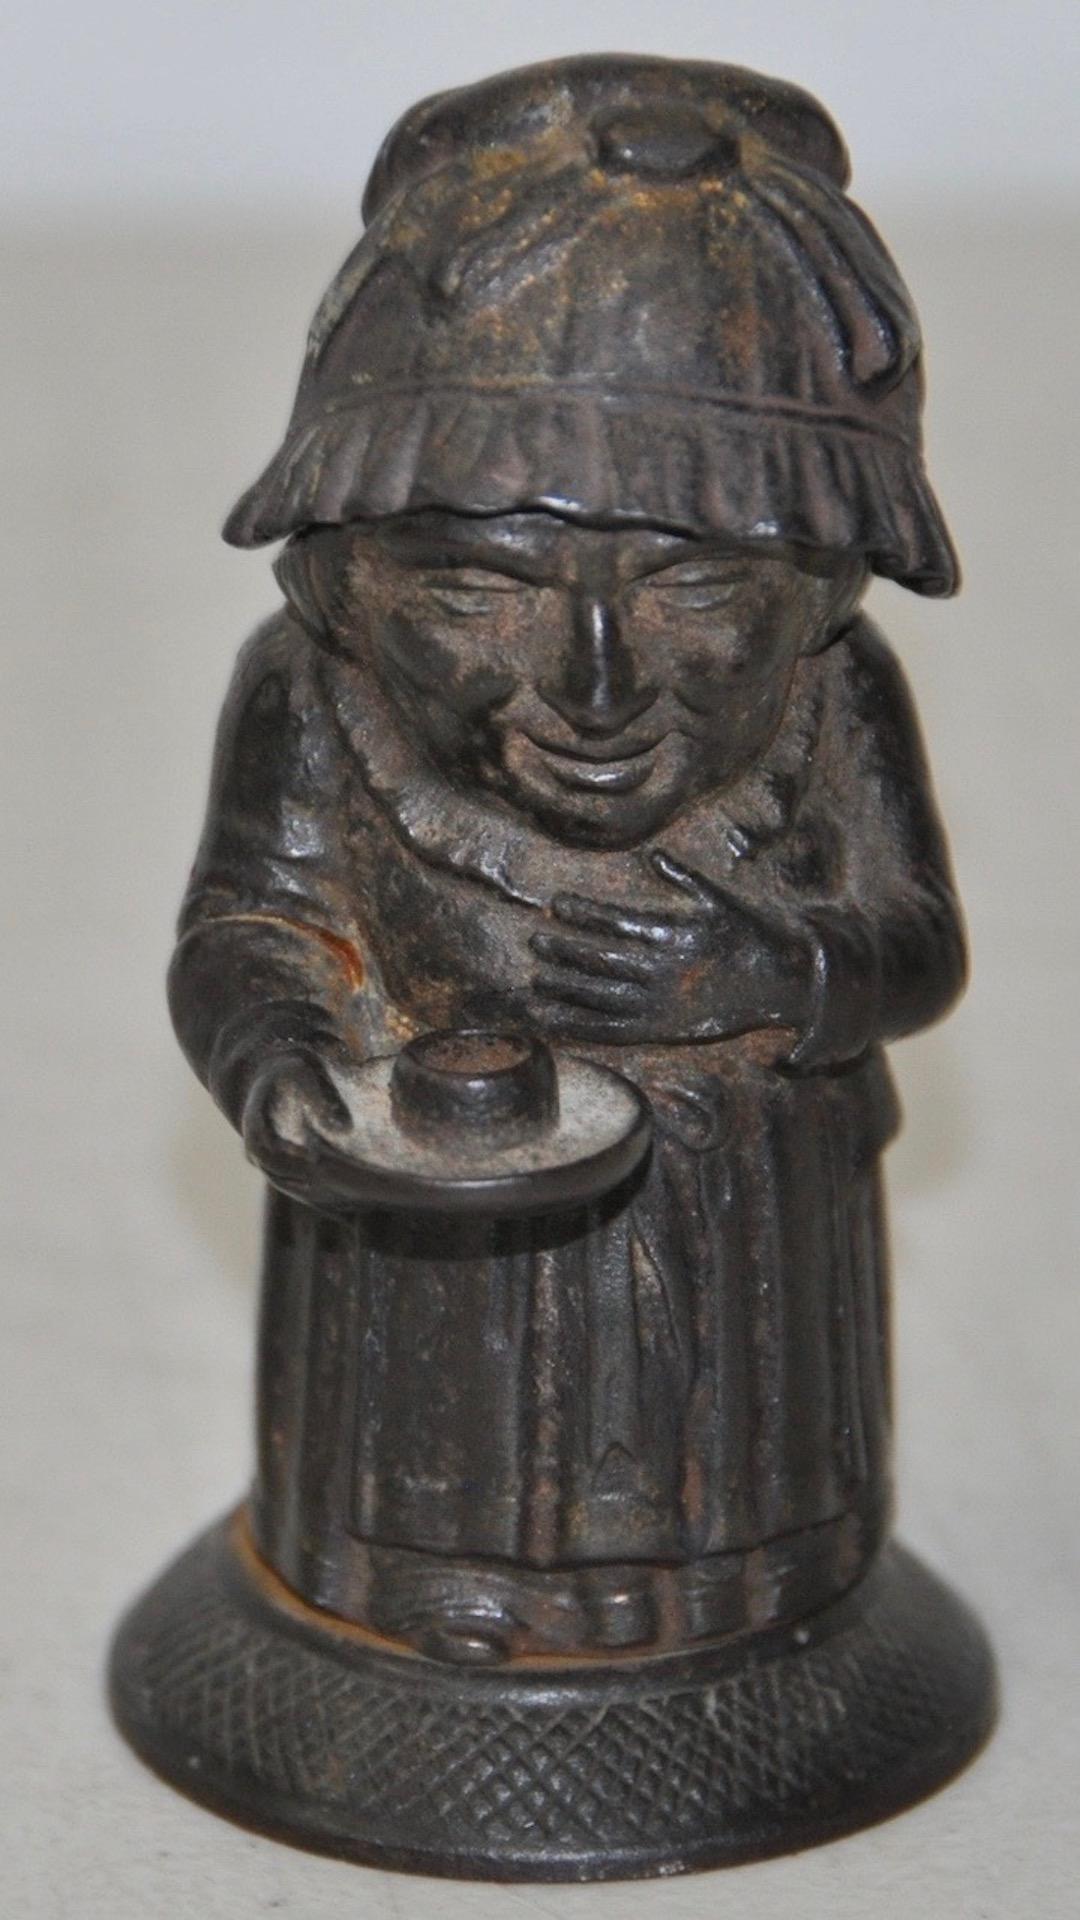 Rare mid-19th century cast iron match holder by Zimmerman of Hanau, Germany, circa 1850

This woman in her night clothes lights her way holding out her candle. Her cap removes to reveal an open space to store stick matches. A small candle will